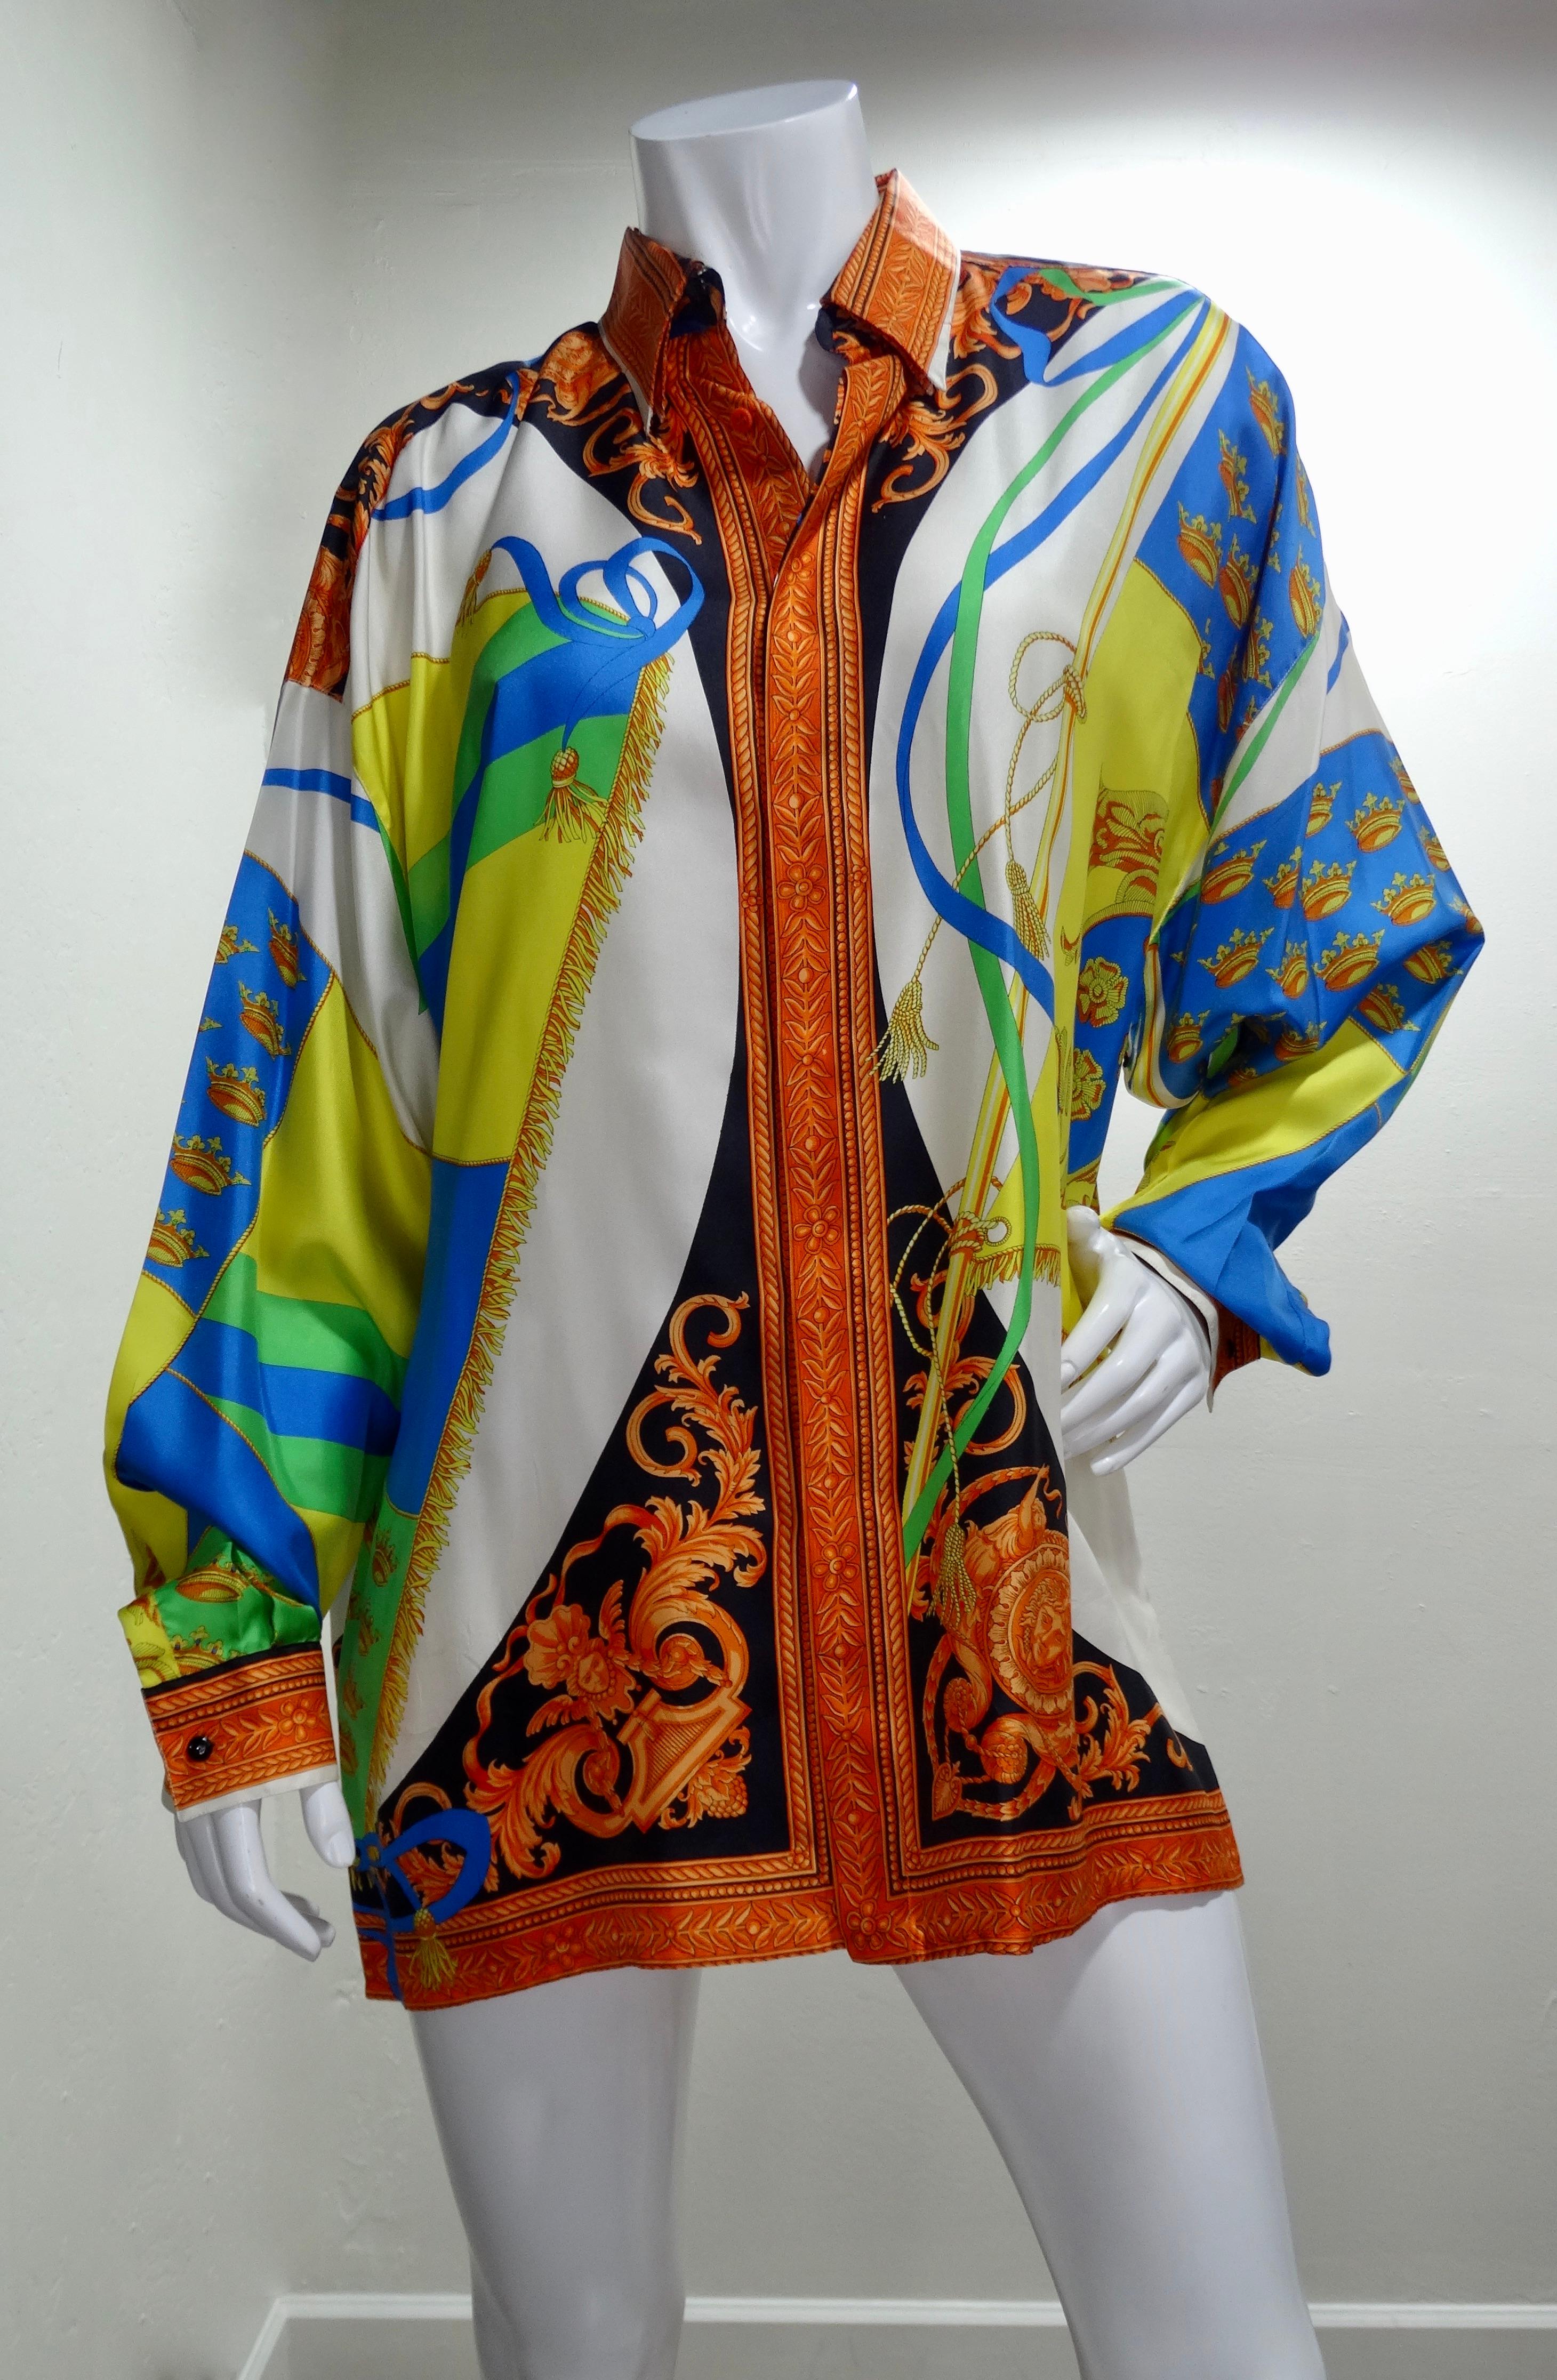 Snag yourself a piece from the Versace archives! Circa 1990s, this colorful silk shirt features a motif of gold fringe flags with signature Versace symbols like the Medusa head and Baroque designs. Classic and timeless, this coveted piece will pair